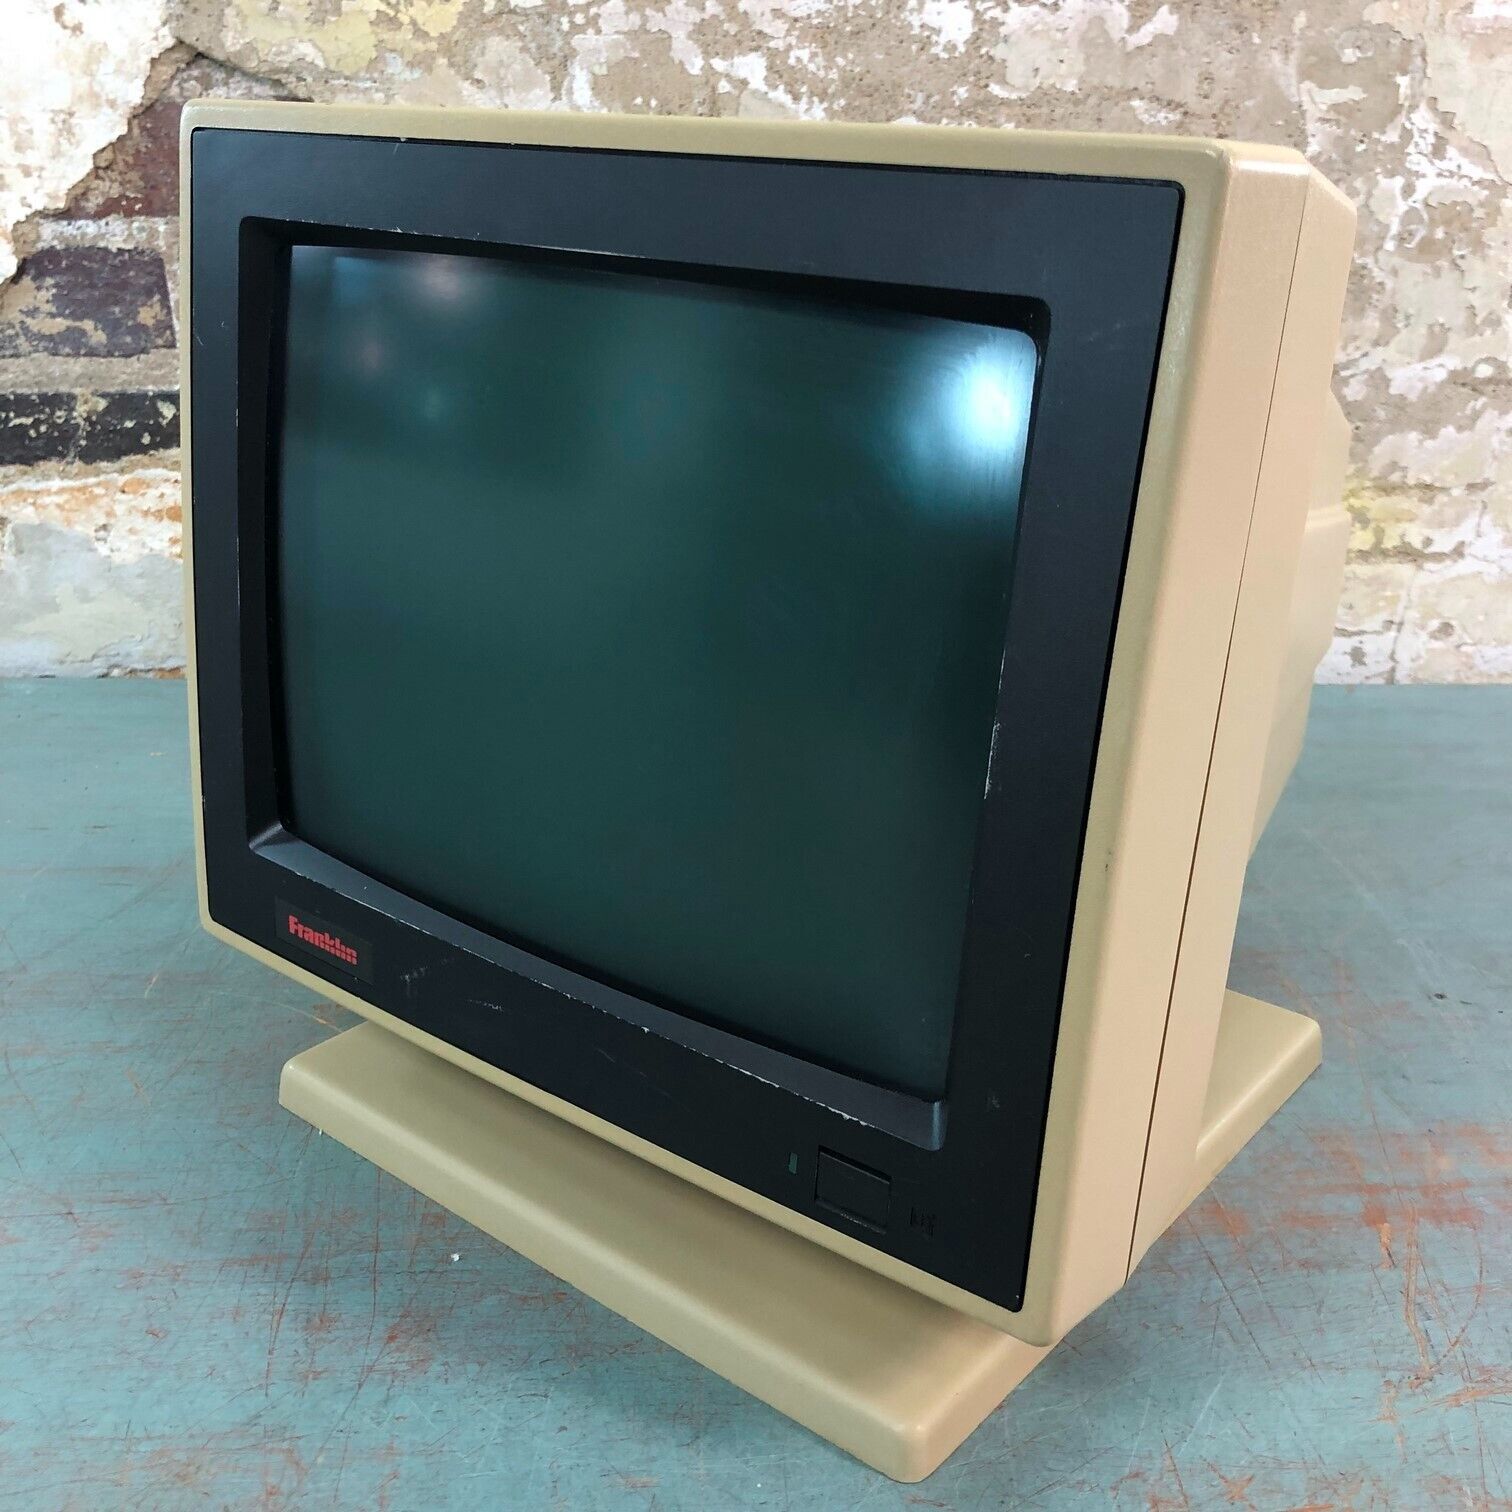 Vintage Franklin Ace MG-120TS Green Monochrome CRT Computer Monitor Apple Clone